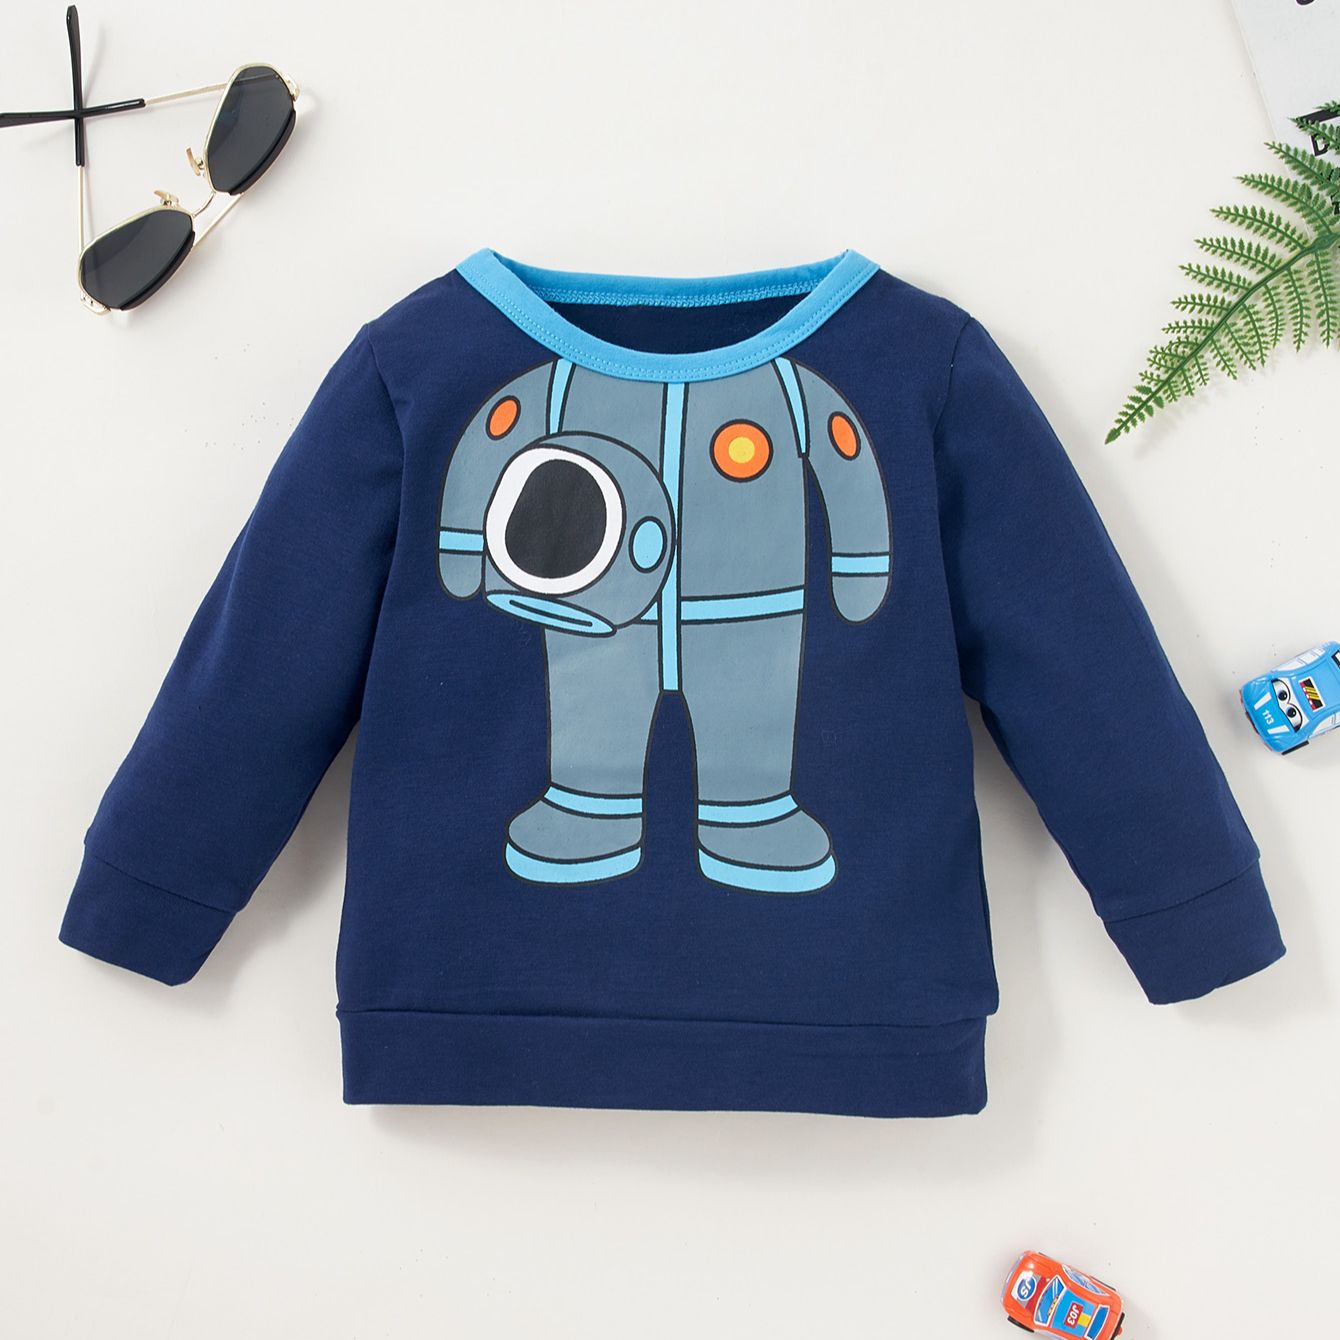 Children-s-Clothing-Set-With-A-Round-Neck-Printed-Long-Sleeved-Top-And-Pants-Two-piece-2